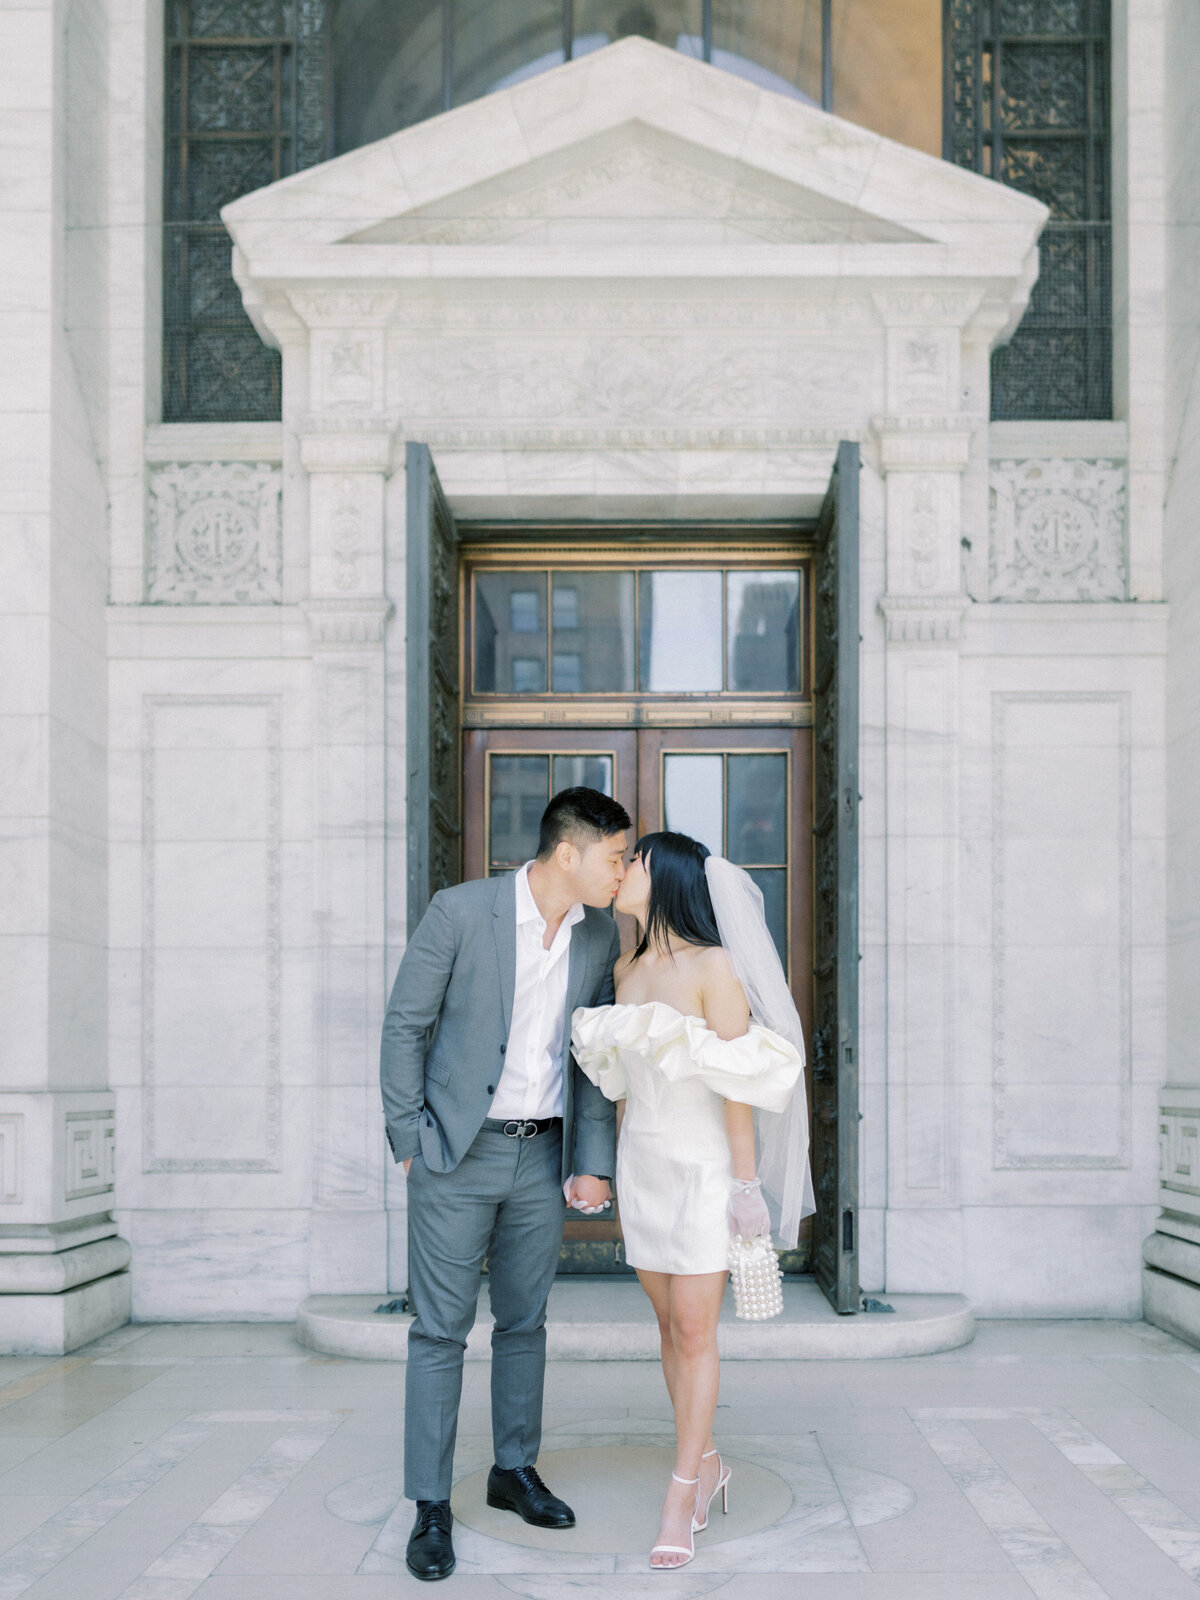 Vogue Editiorial NYC Elopement Themed Engagement Session Highlights | Amarachi Ikeji Photography 28